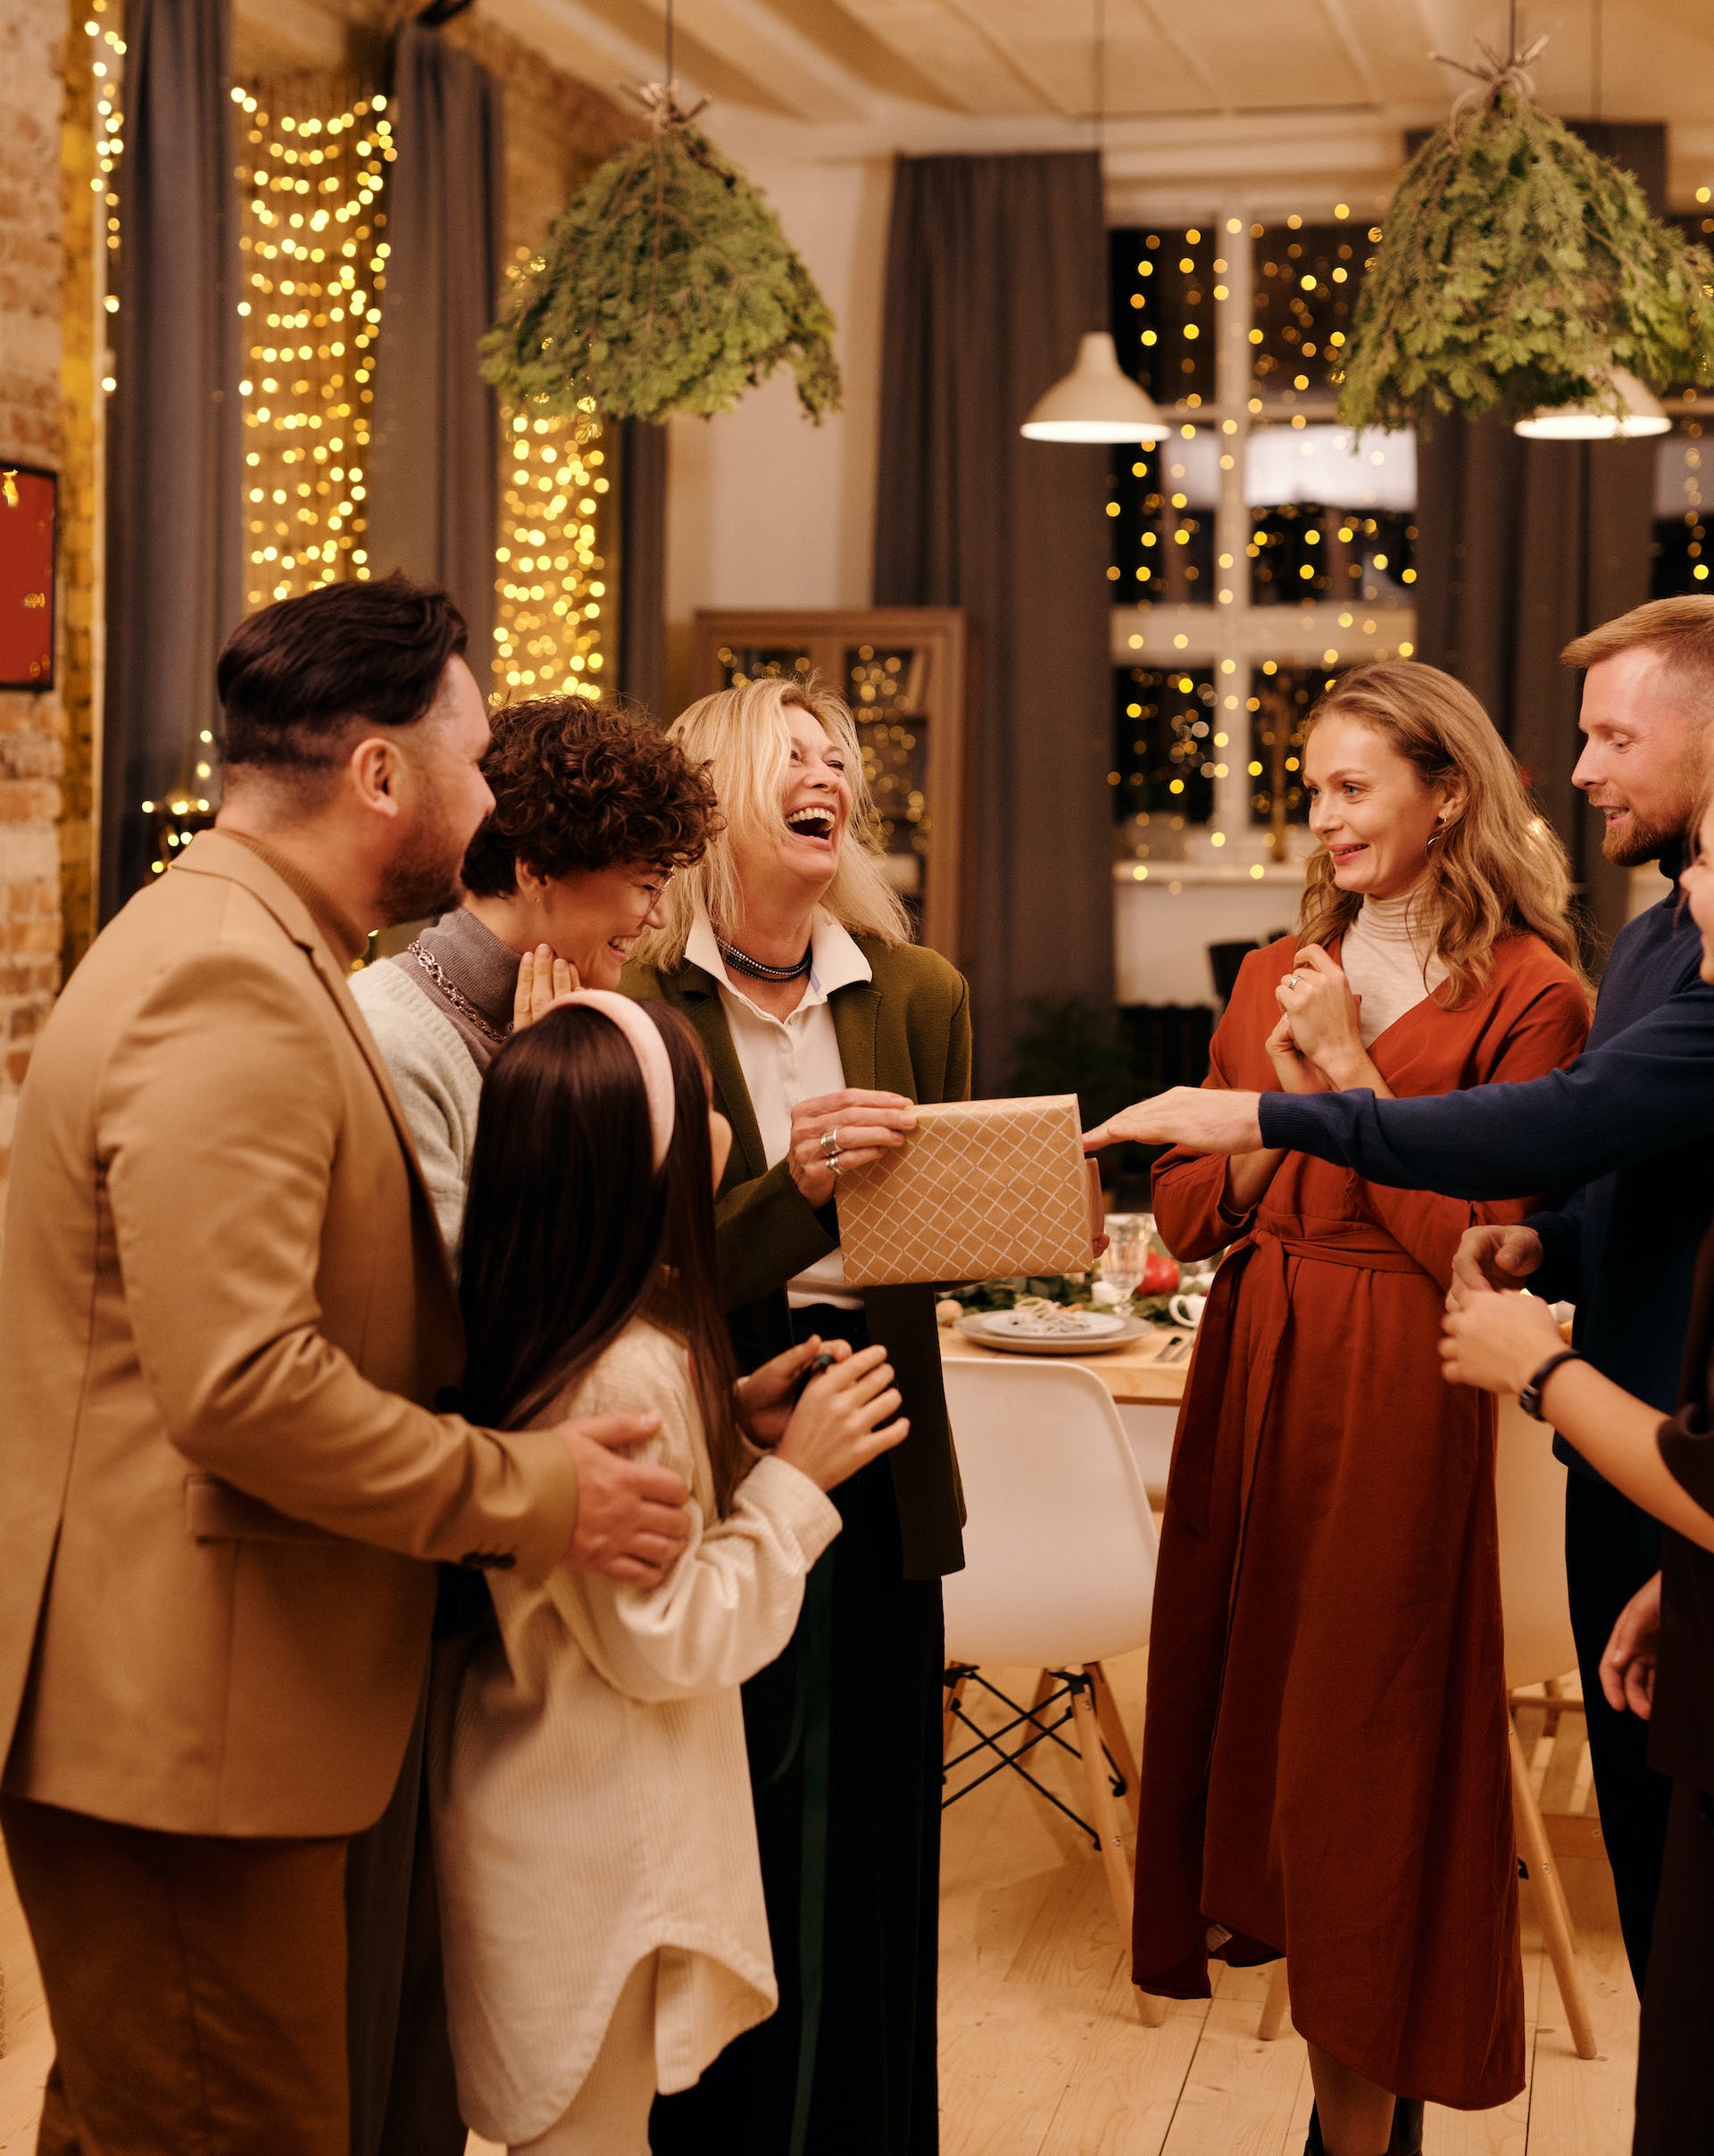 Family members gathered during Christmastime | Source: Pexels